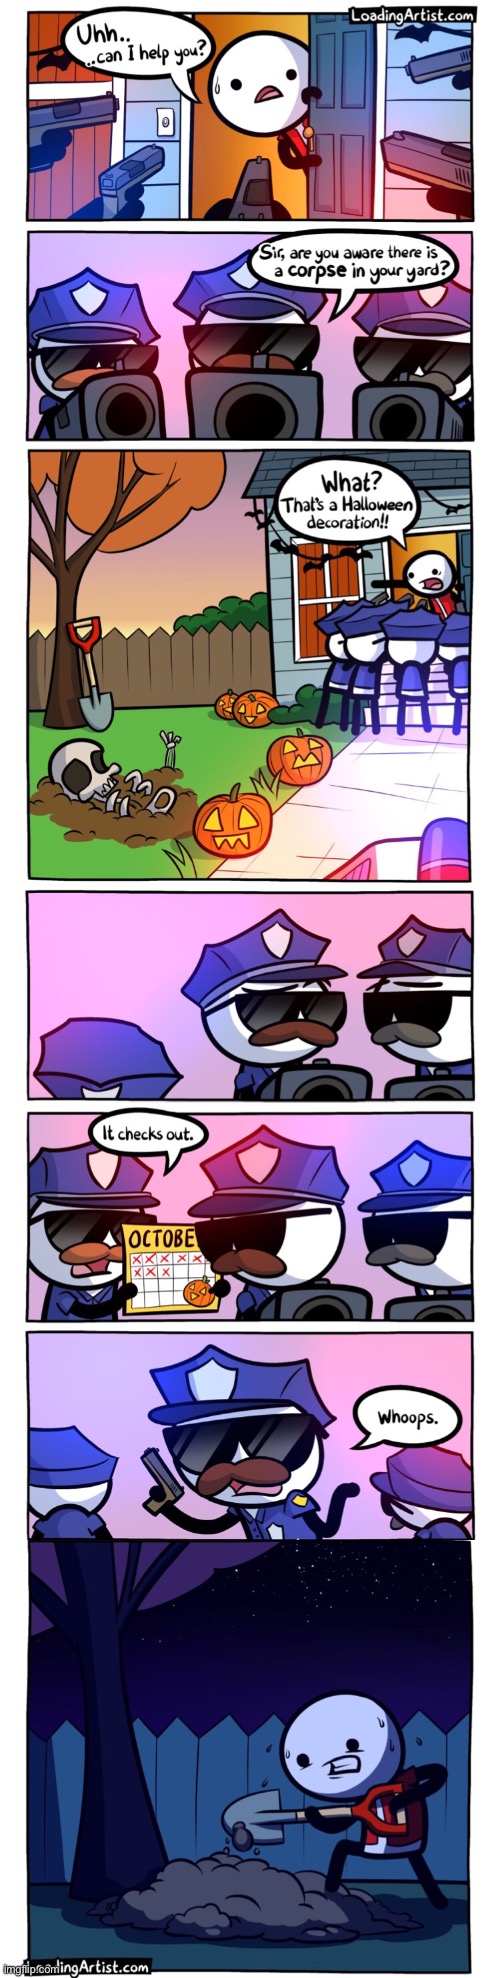 Shoutout to CactusCoder13 for finding this for me :D (#1,674) | image tagged in comics/cartoons,comics,loading,artist,halloween,police | made w/ Imgflip meme maker